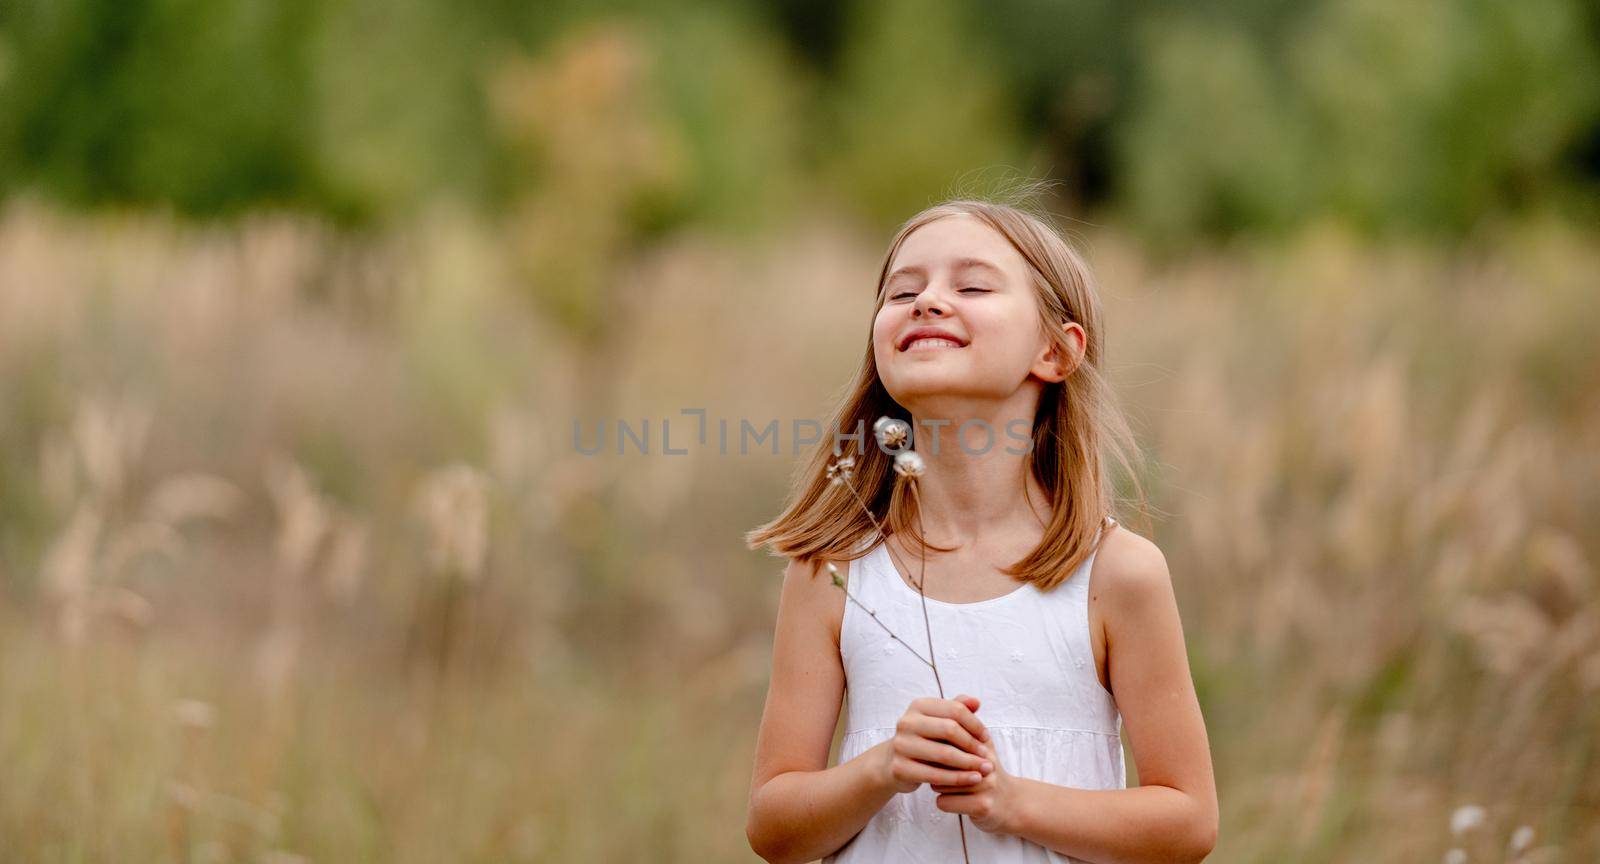 Preteen girl with flower in the field smiling and looking at camera. Pretty child kid enjoying the nature